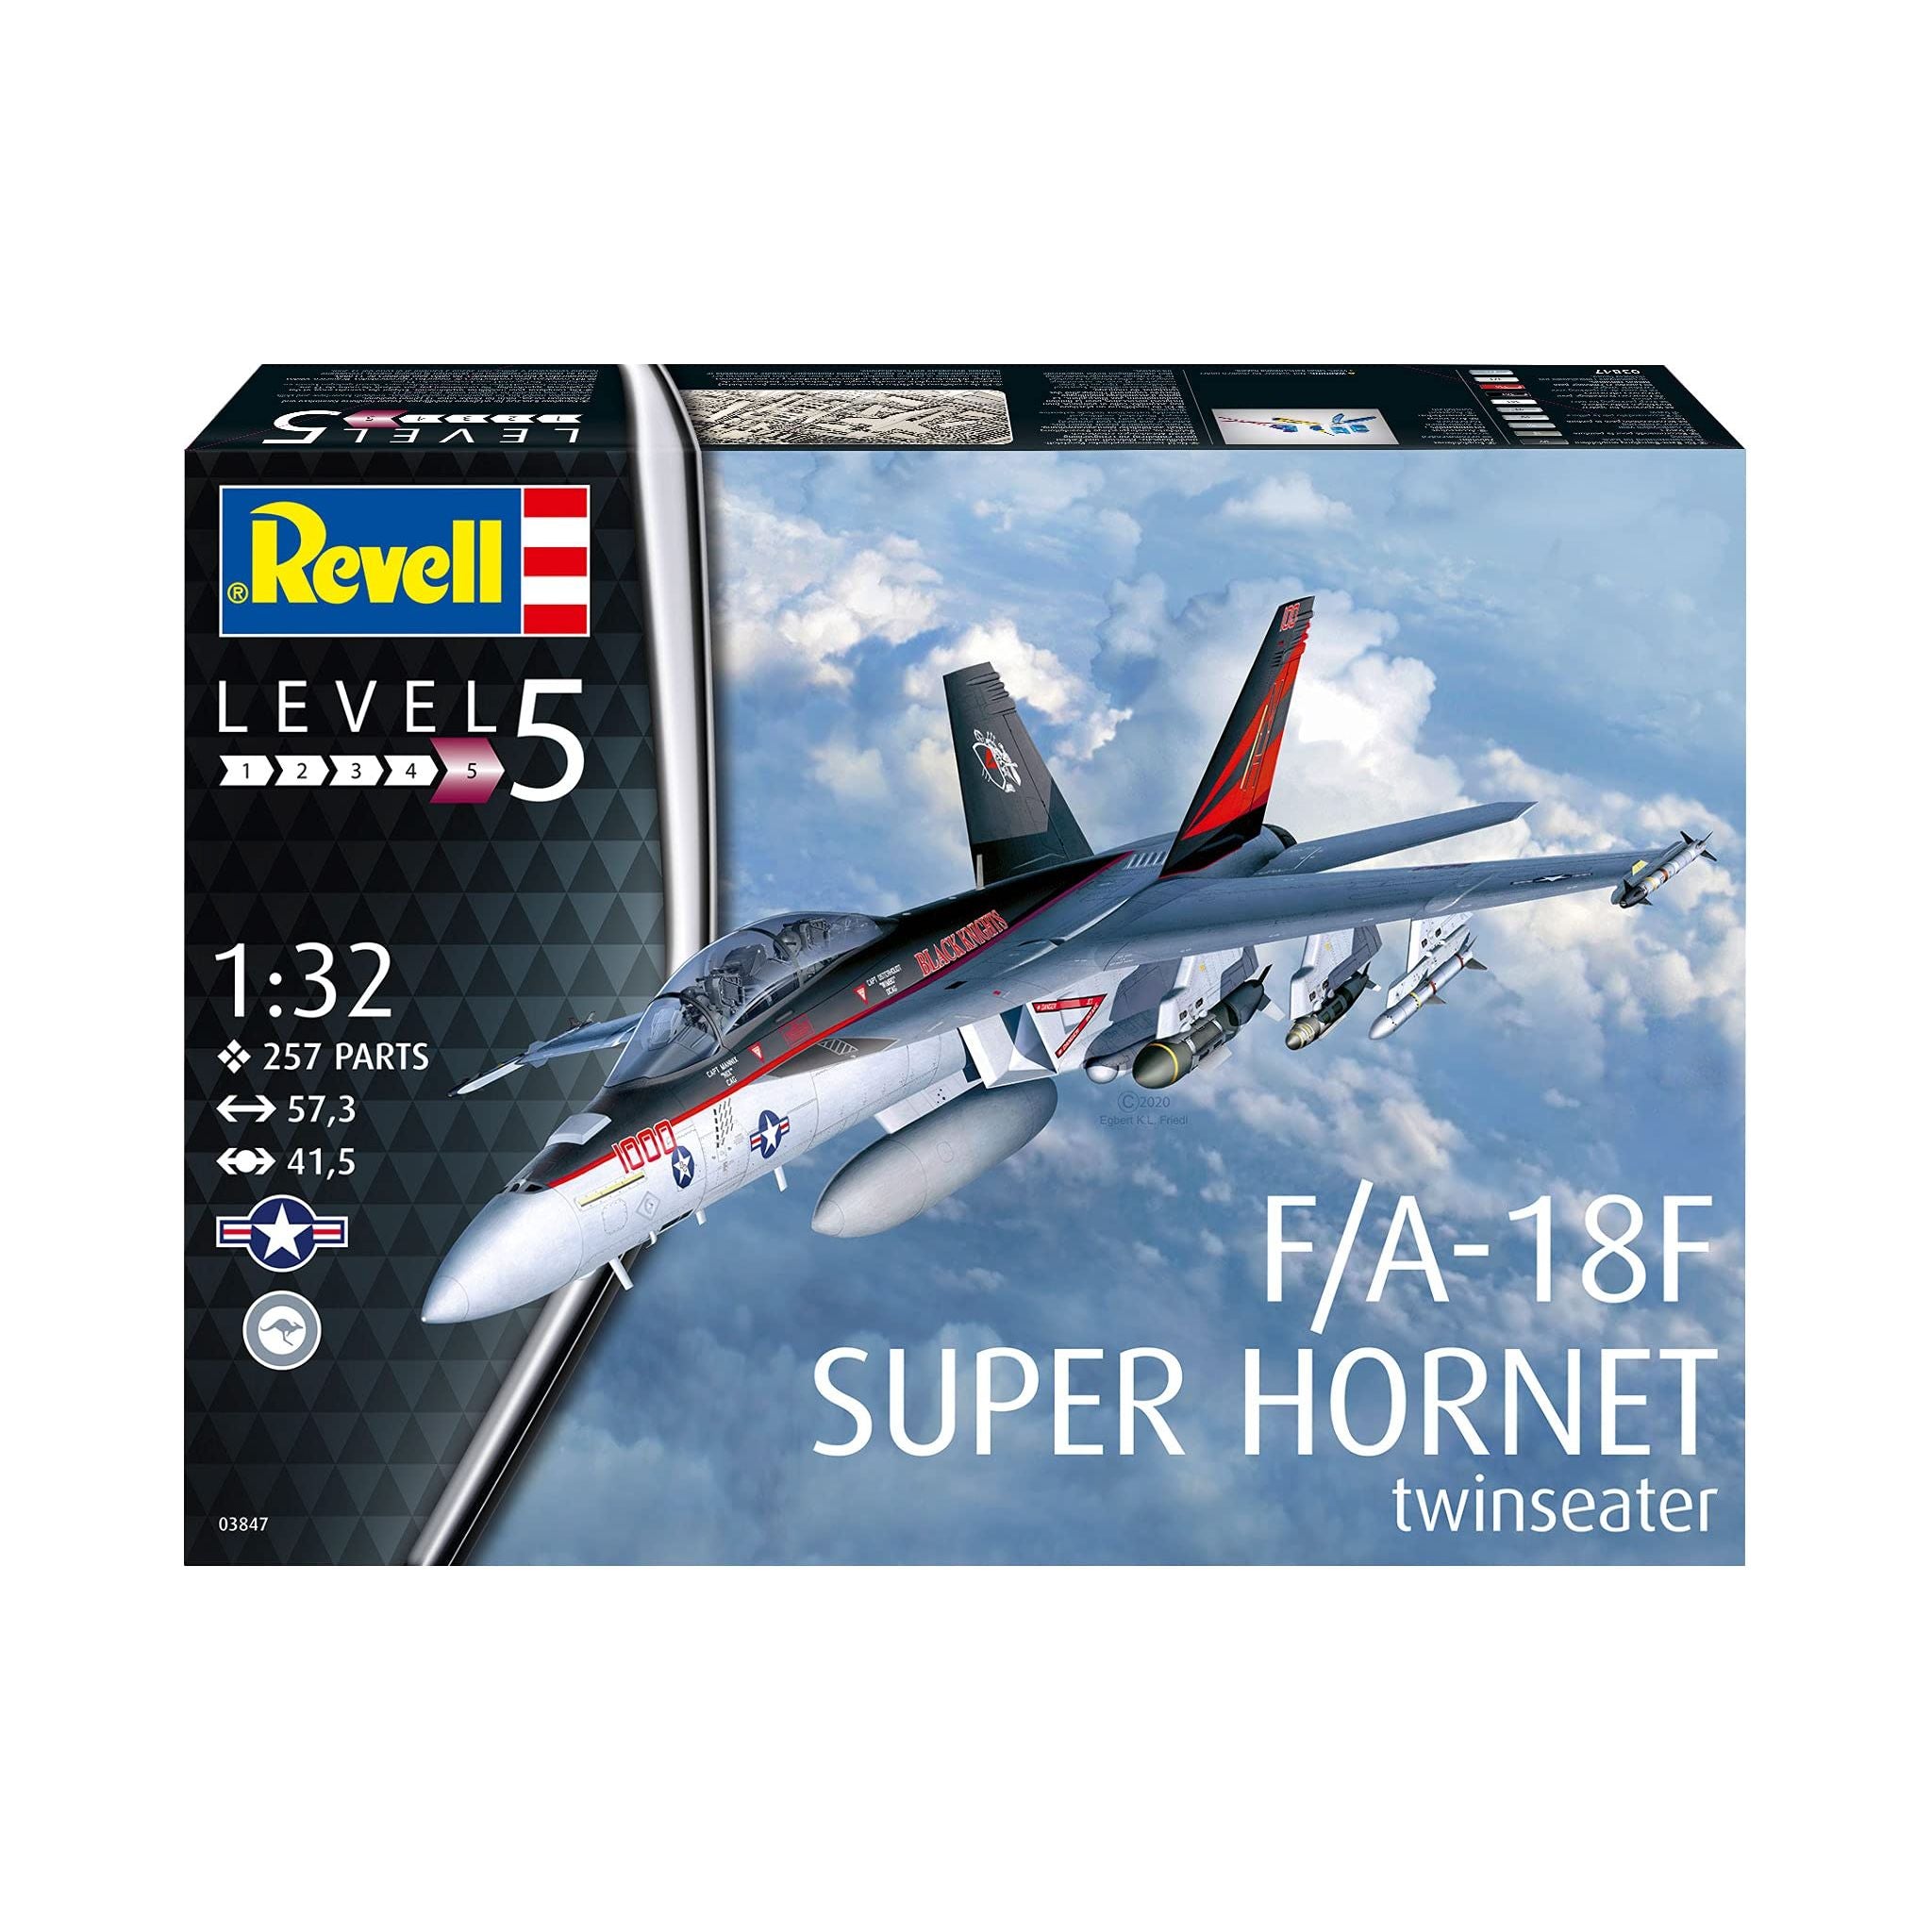 REVELL 1/32 F/A-18F Super Hornet Twinseater